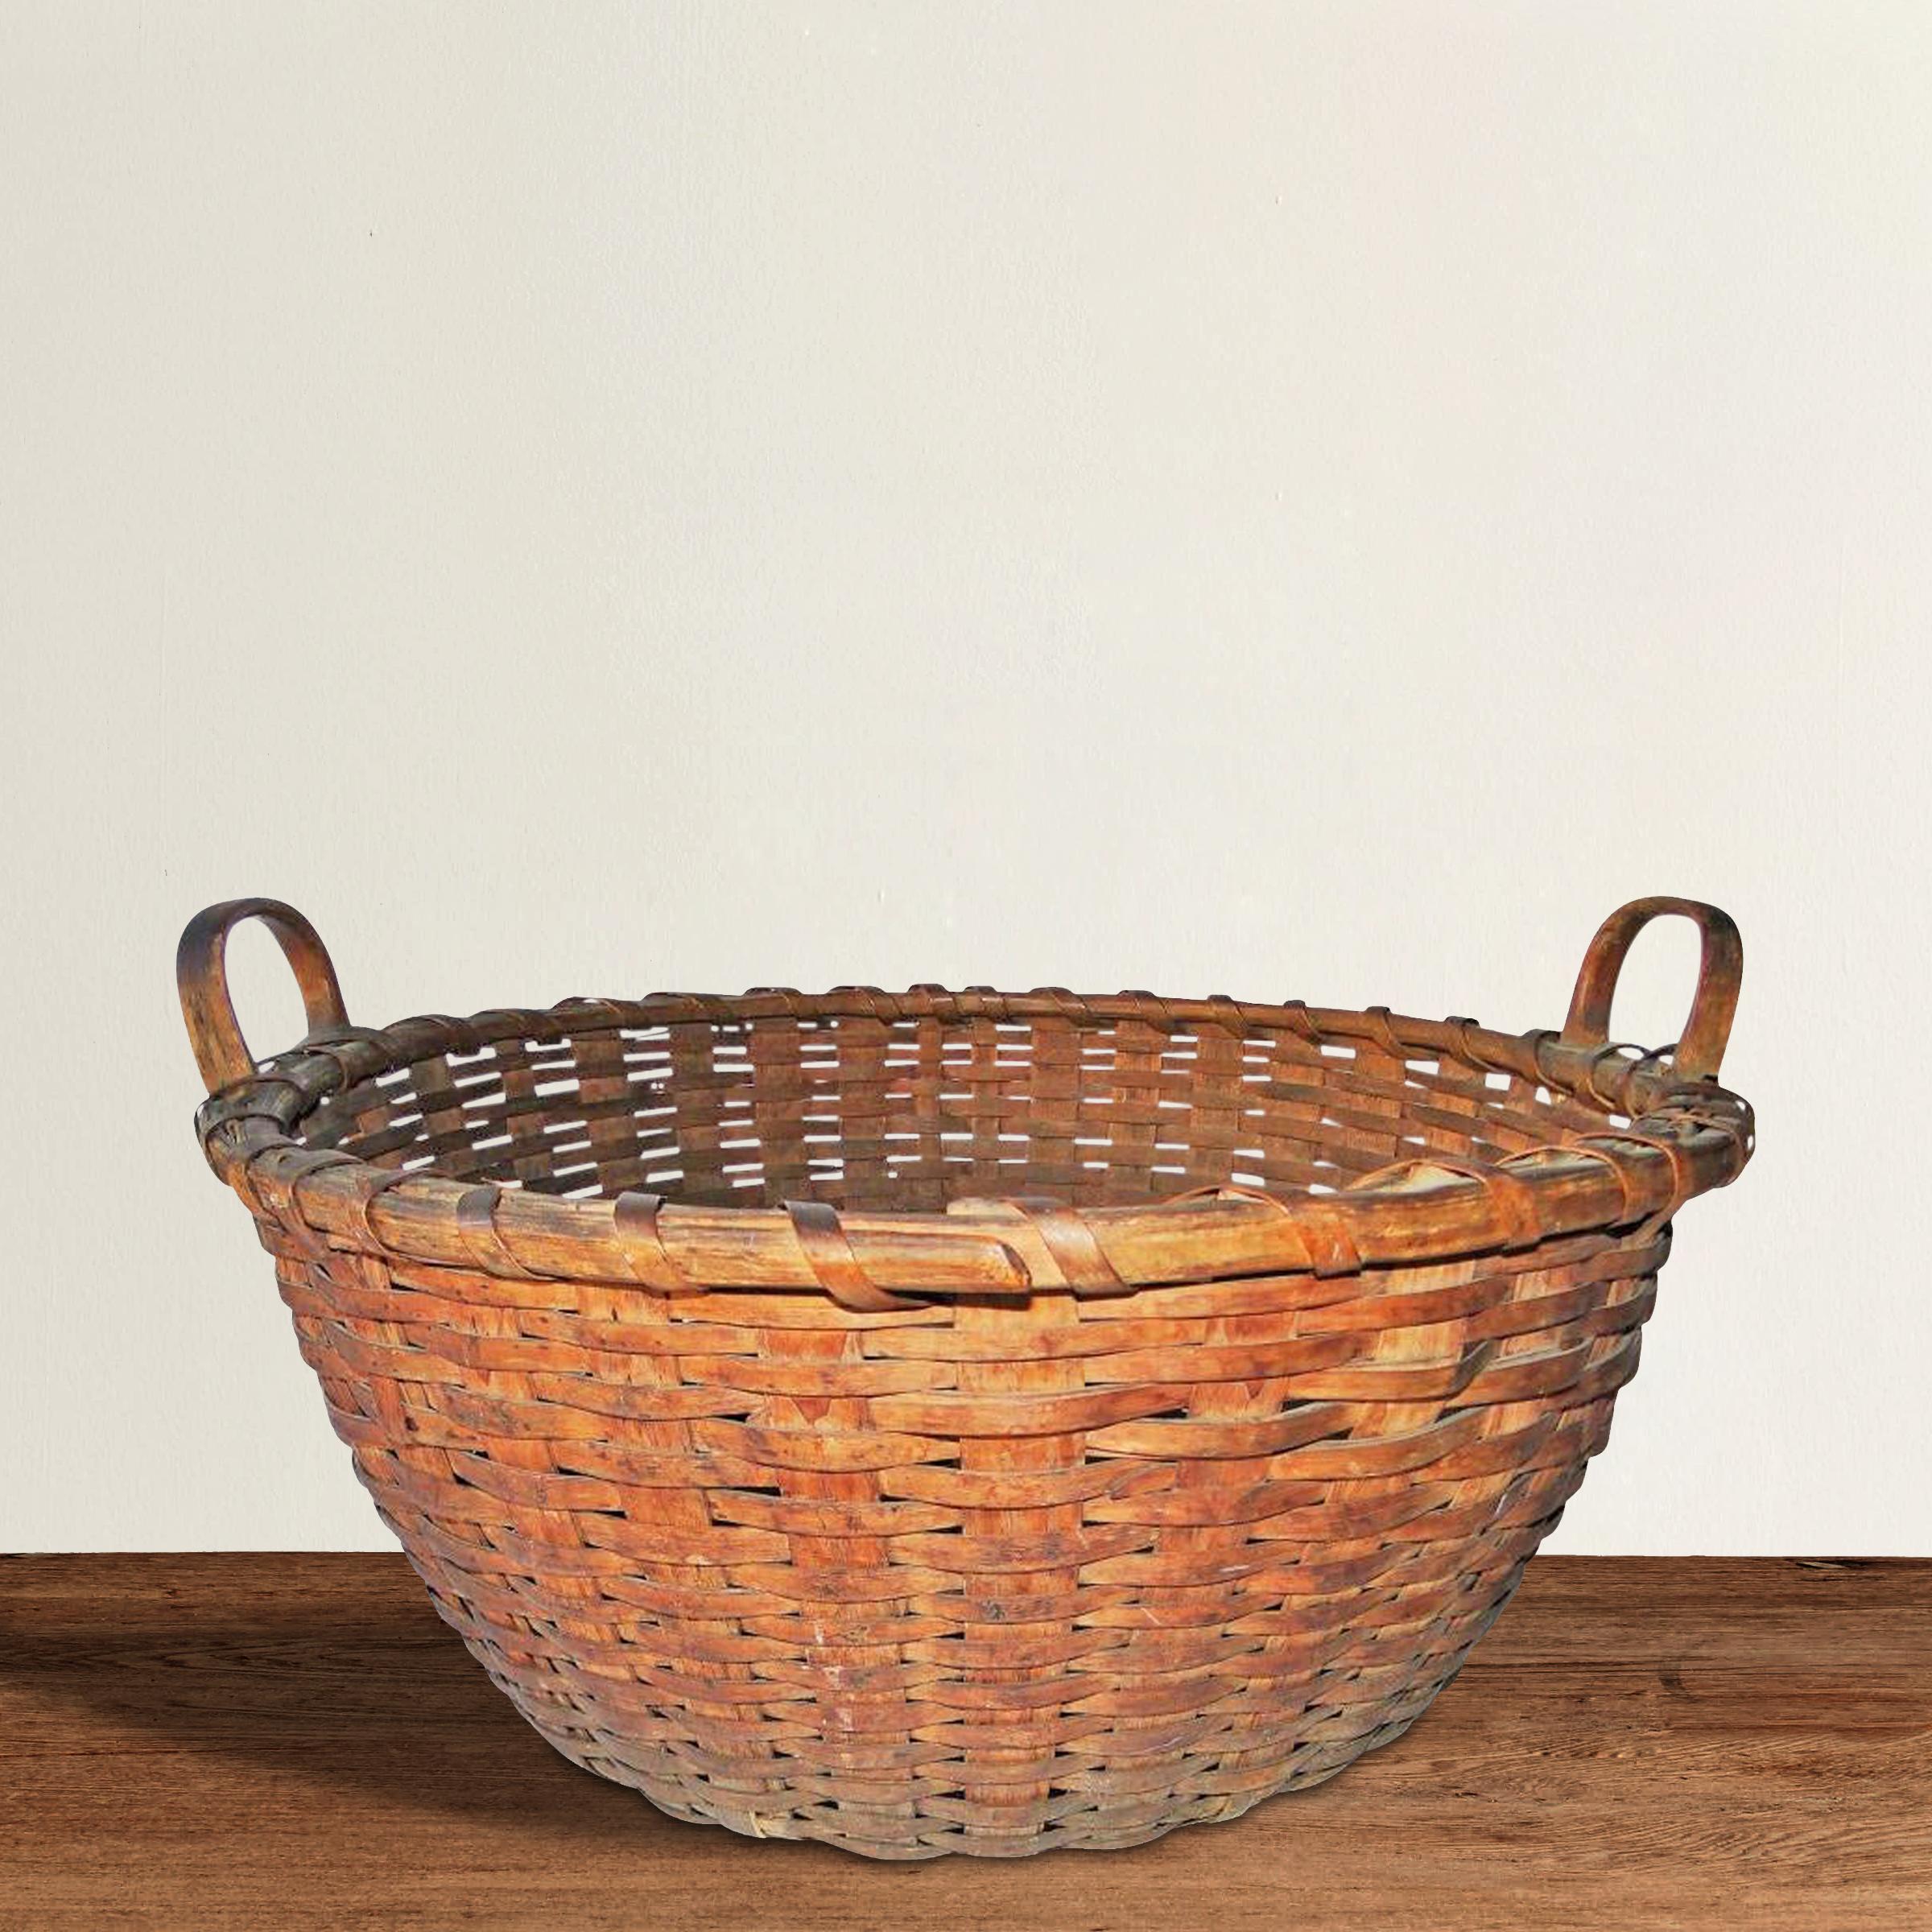 A large 19th century American handwoven ash splint cat head basket with a double -banded bentwood rim, carved and bentwood handles, and a fantastic patina only one hundred and fifty years of use can bestow. The term cat head refers to the shape of